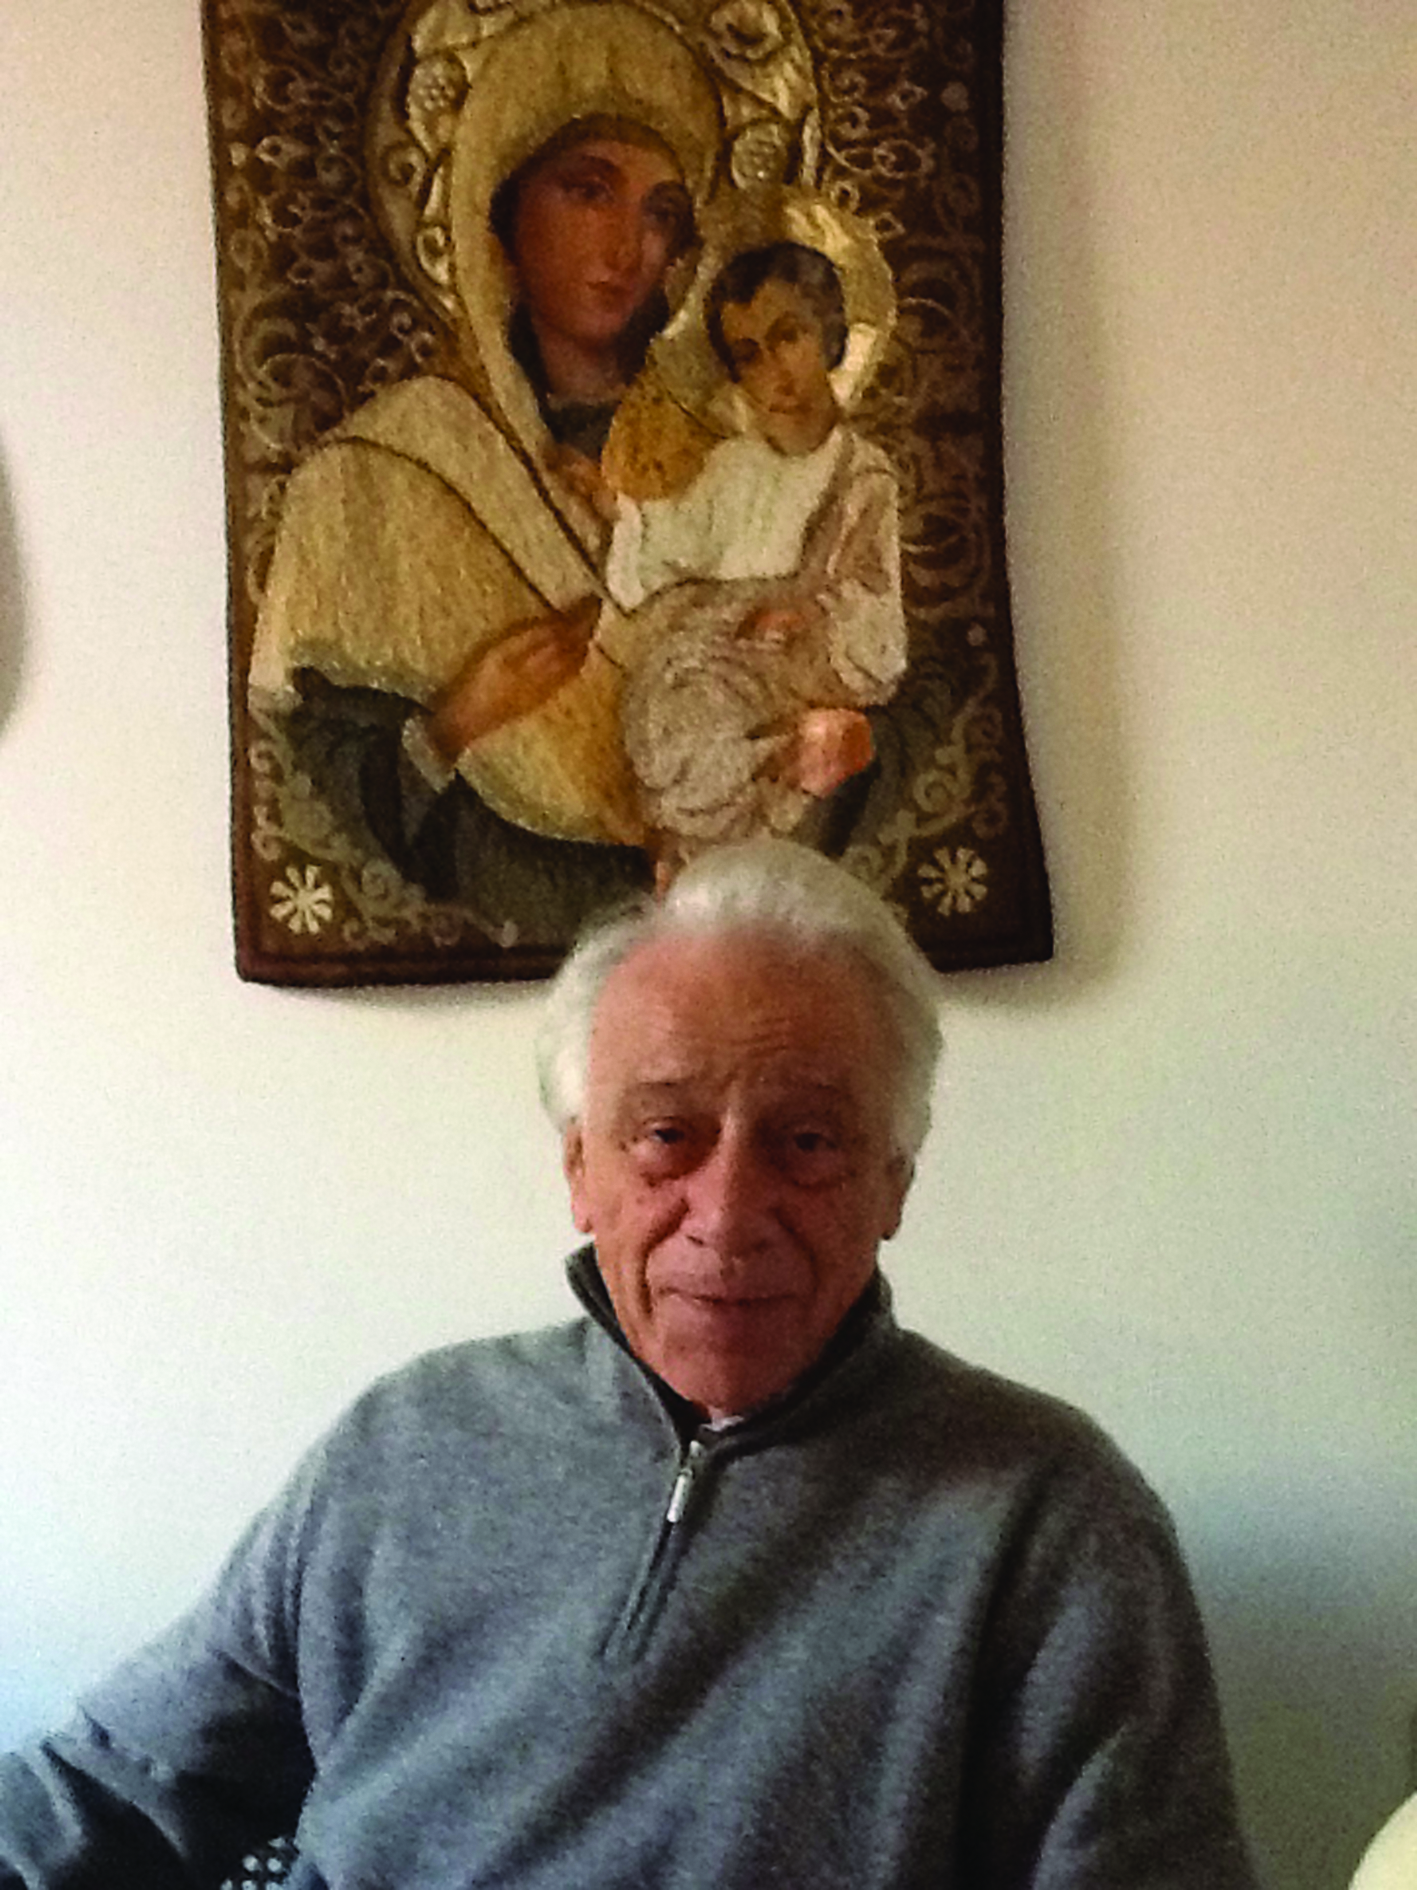 Fr. Gino Belleri: “Icon of a Vatican that no longer exists” dies on May 16 at age 93